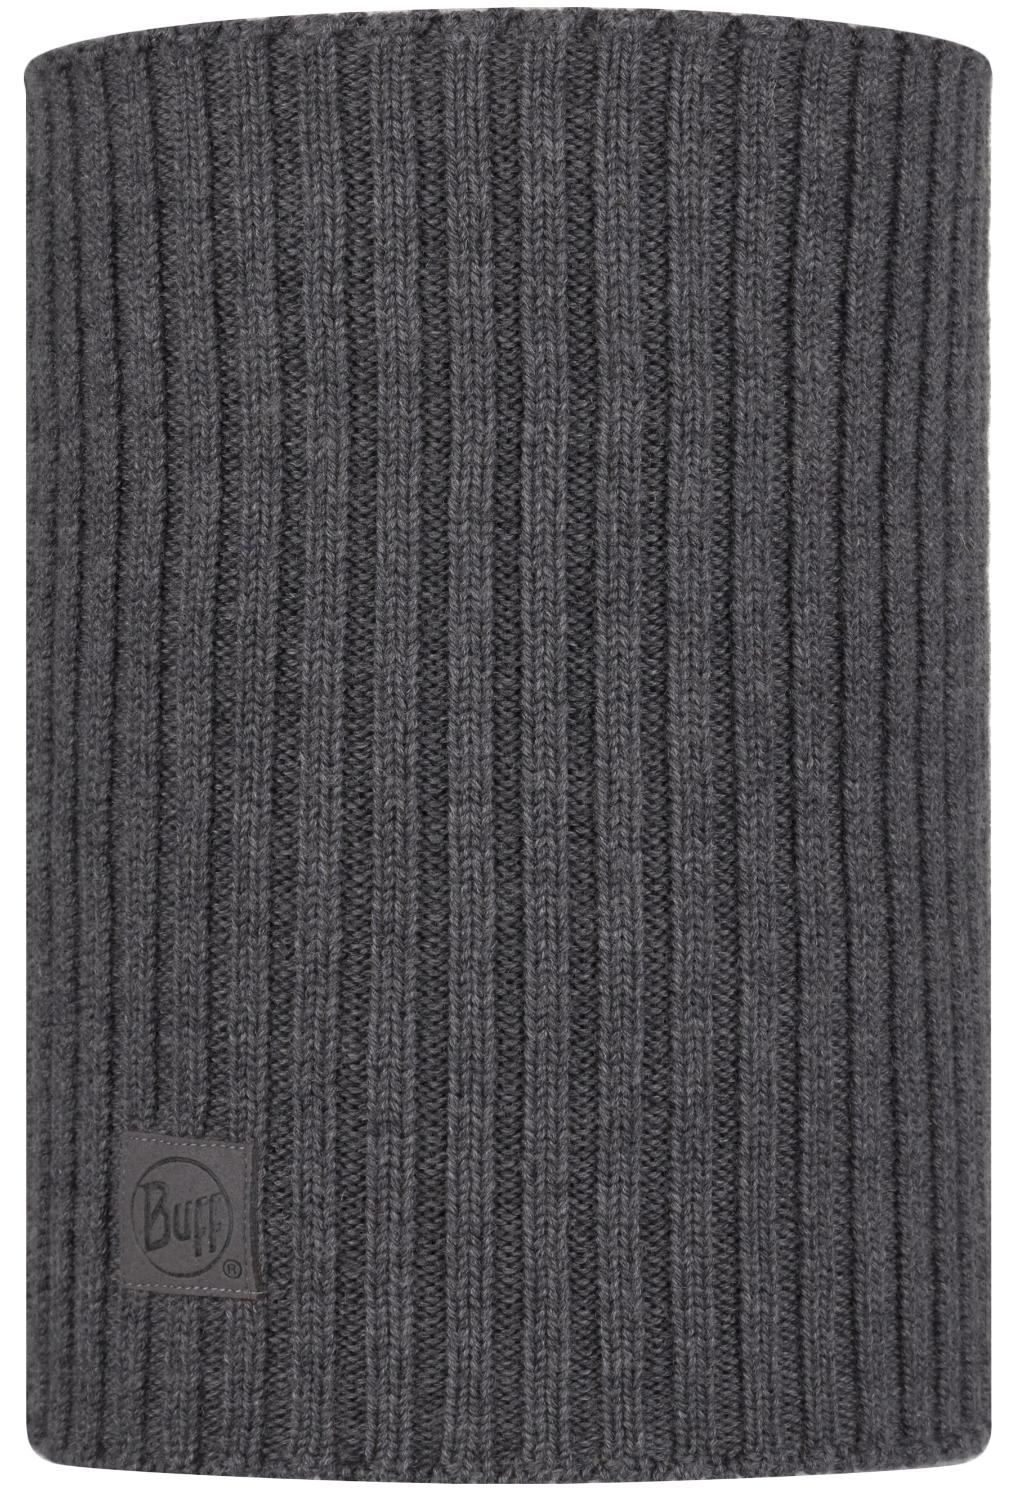 Шарф Buff Knitted Neckwarmer Norval Grey